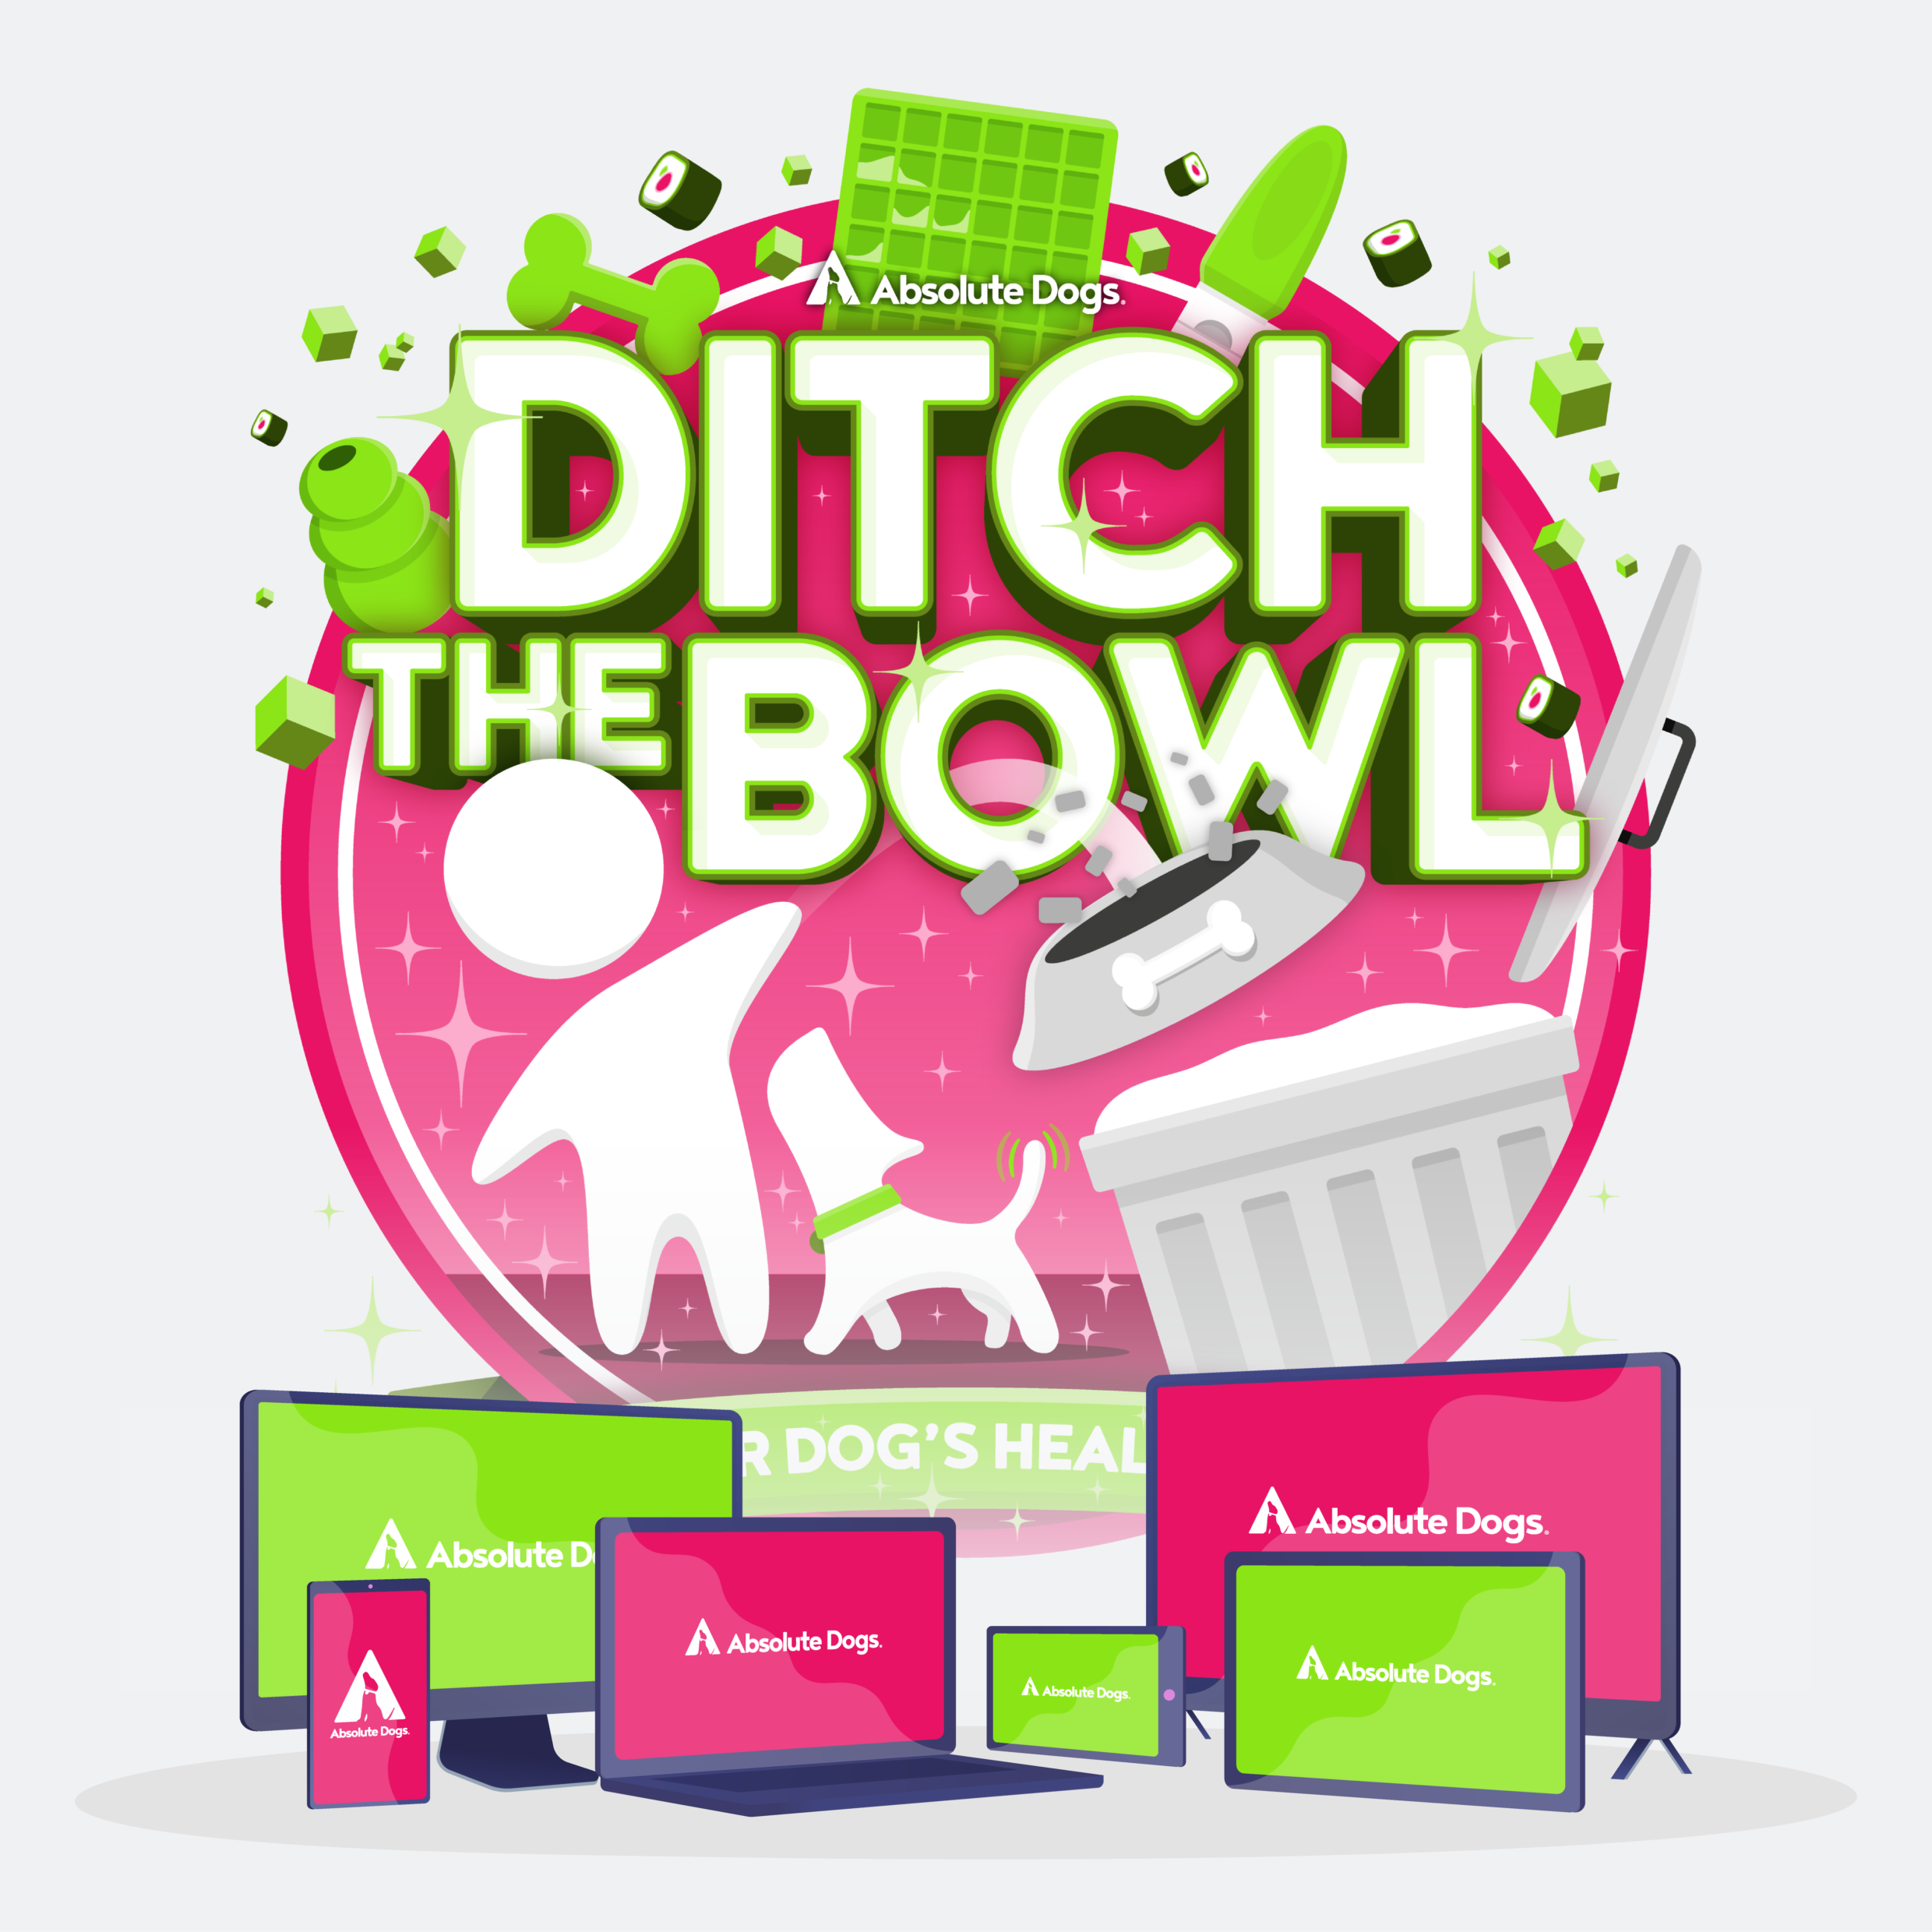 https://absolutedogs-images.s3.eu-west-2.amazonaws.com/uploads/2022/10/AD_CourseBadge_DitchTheBowl.png